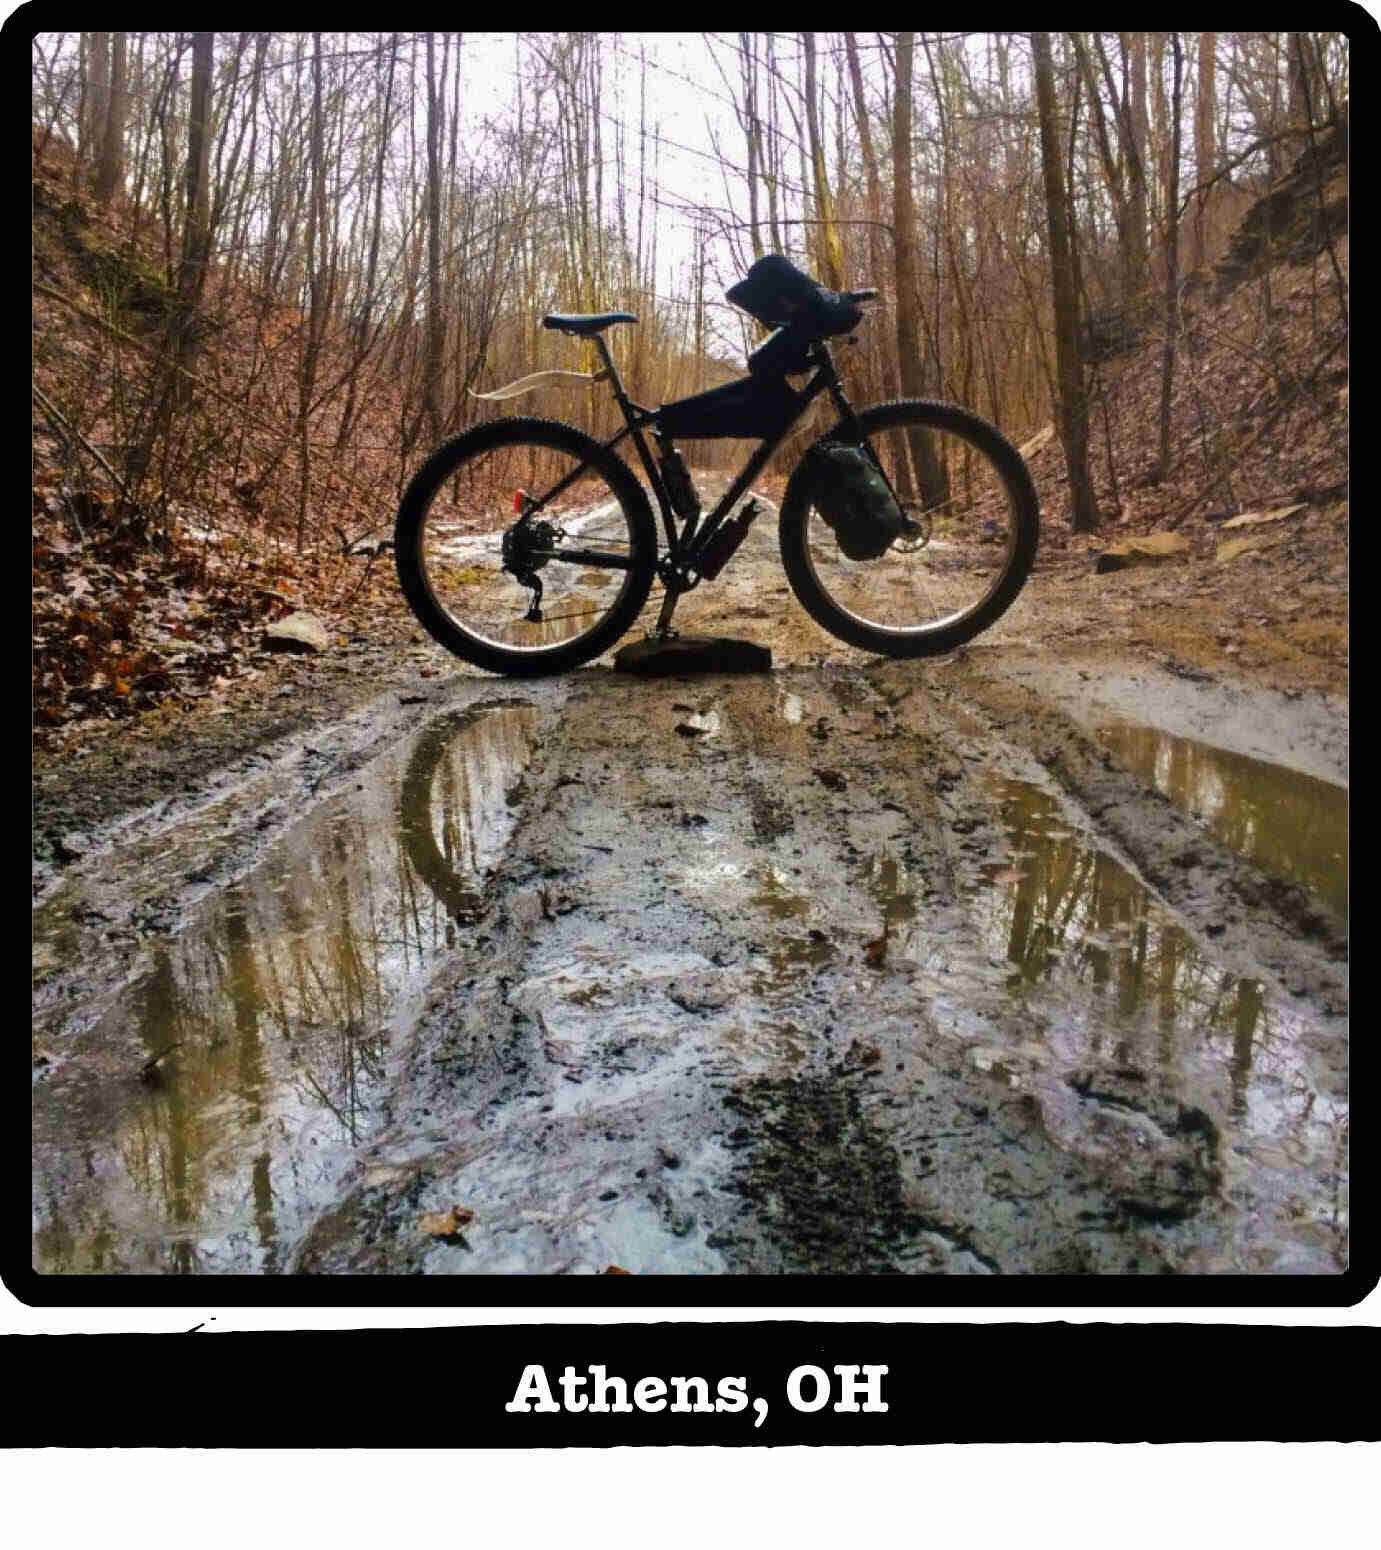 Right profile of a Surly ECR bike standing across a muddy trail in the woods - Athens, OH tag below image